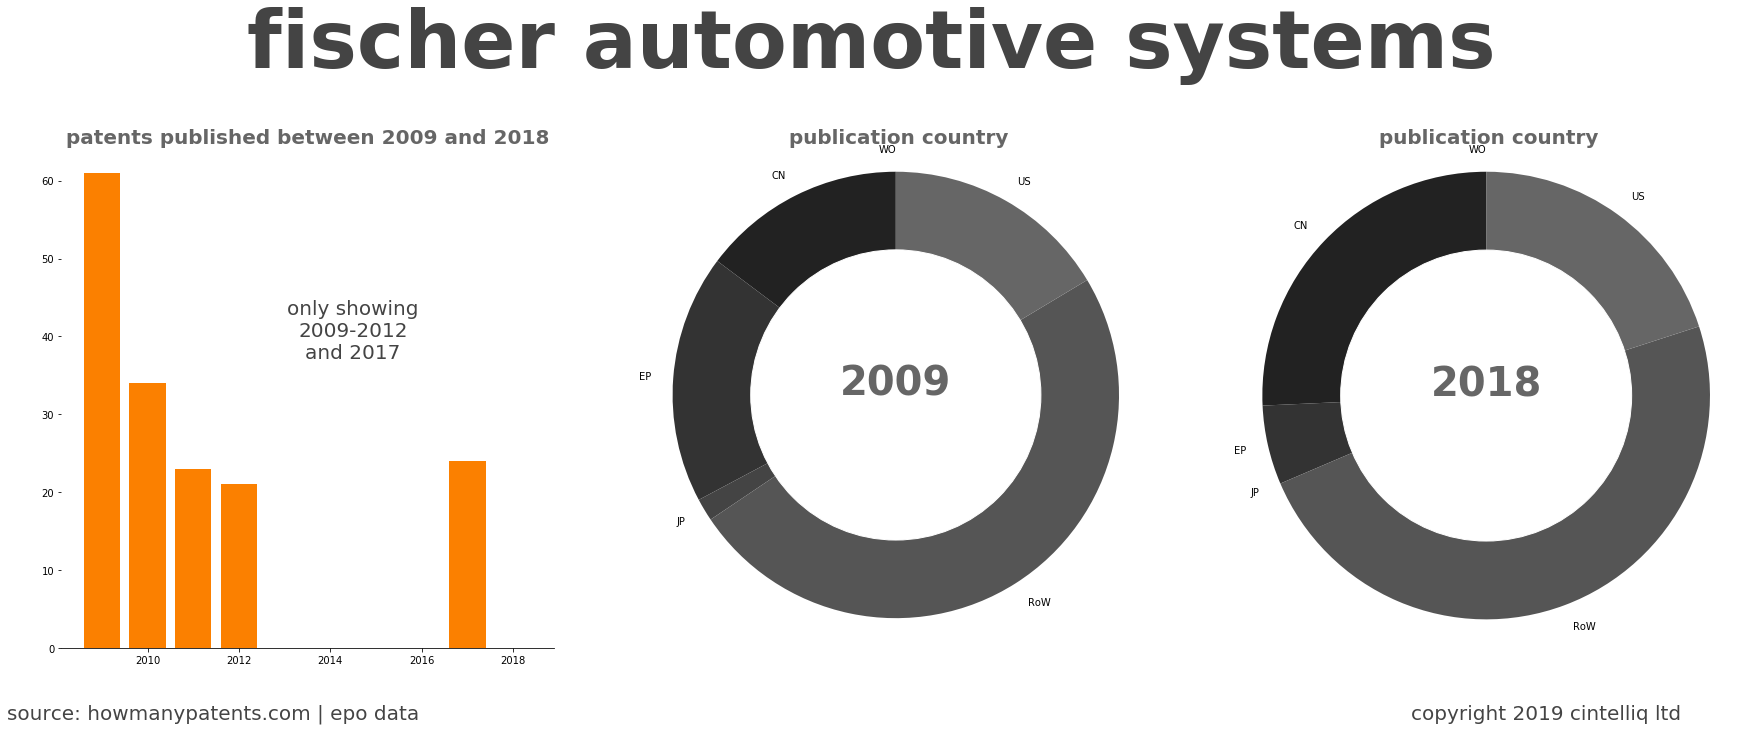 summary of patents for Fischer Automotive Systems